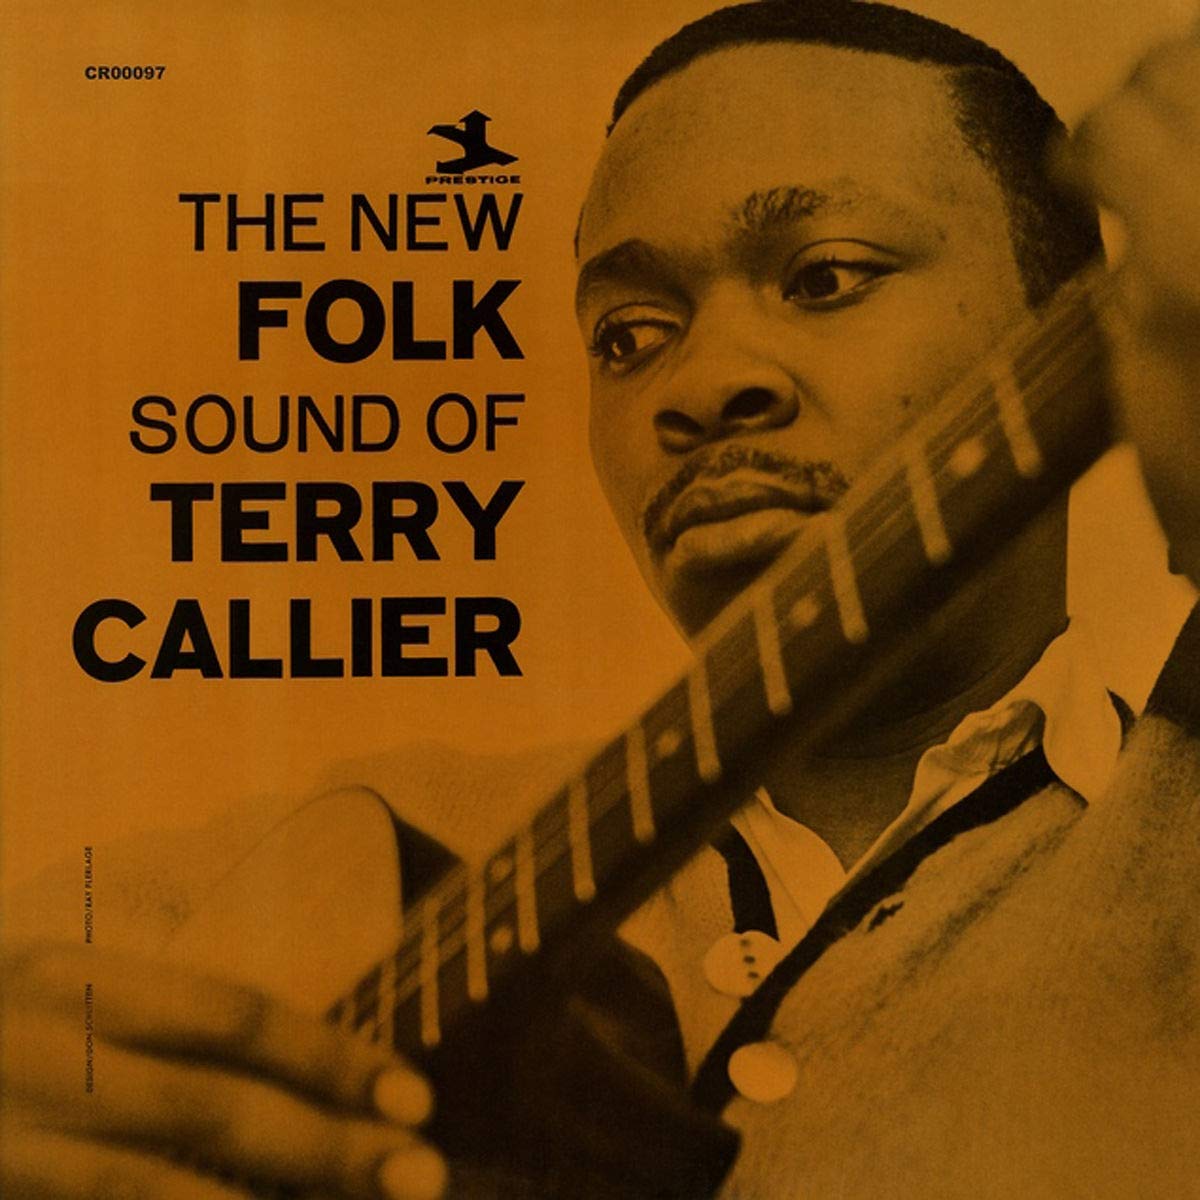 The New Folk Sound Of Terry Callier (Deluxe)